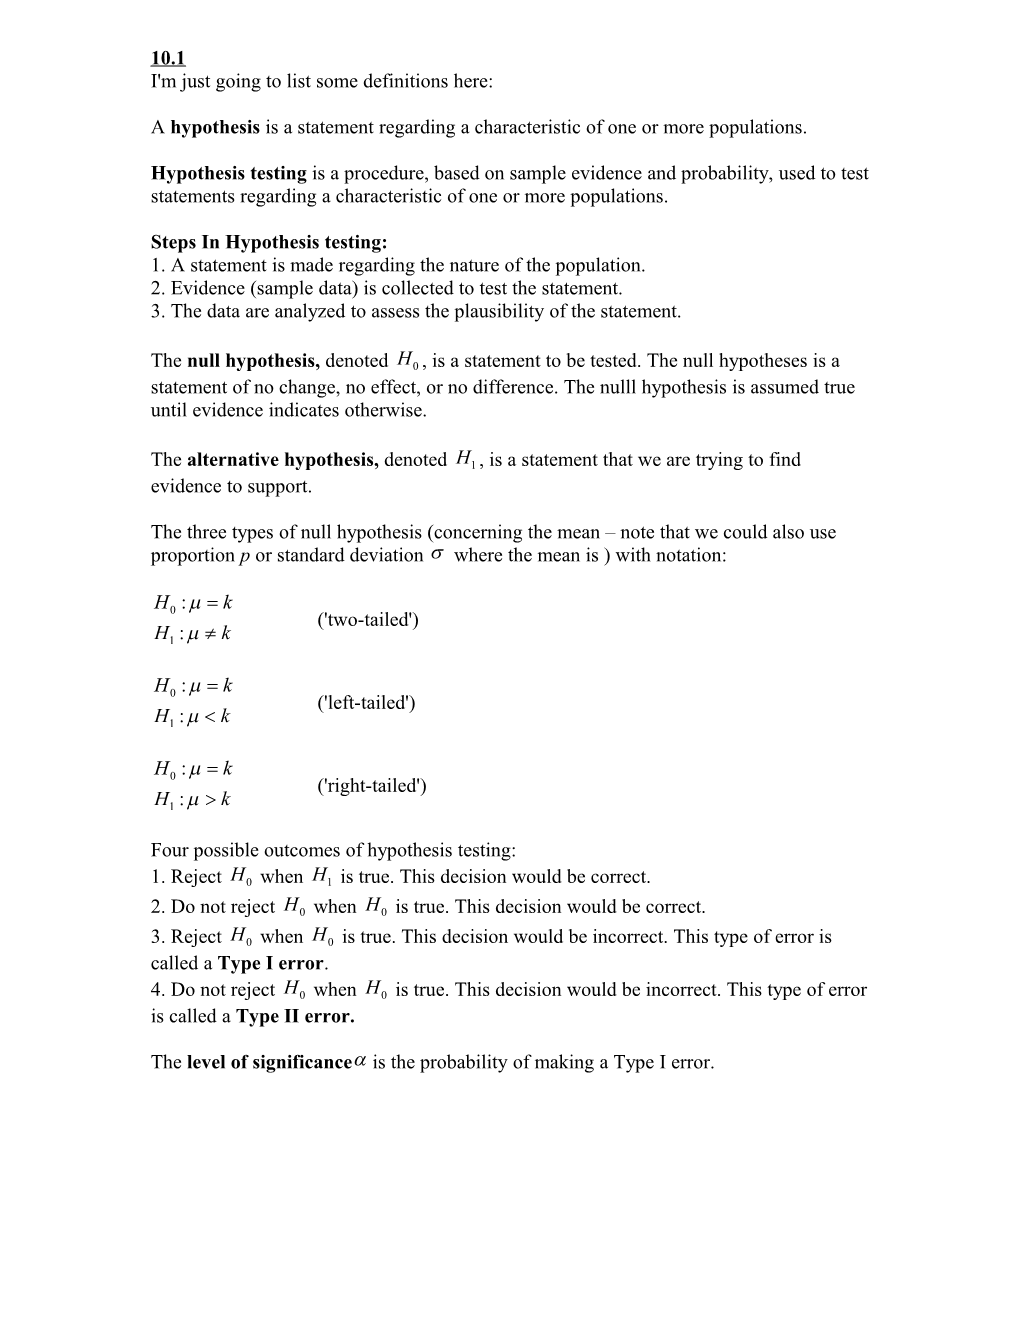 MAT 120 (Brief) Notes, Definitions, Formulas Chapters 9-10